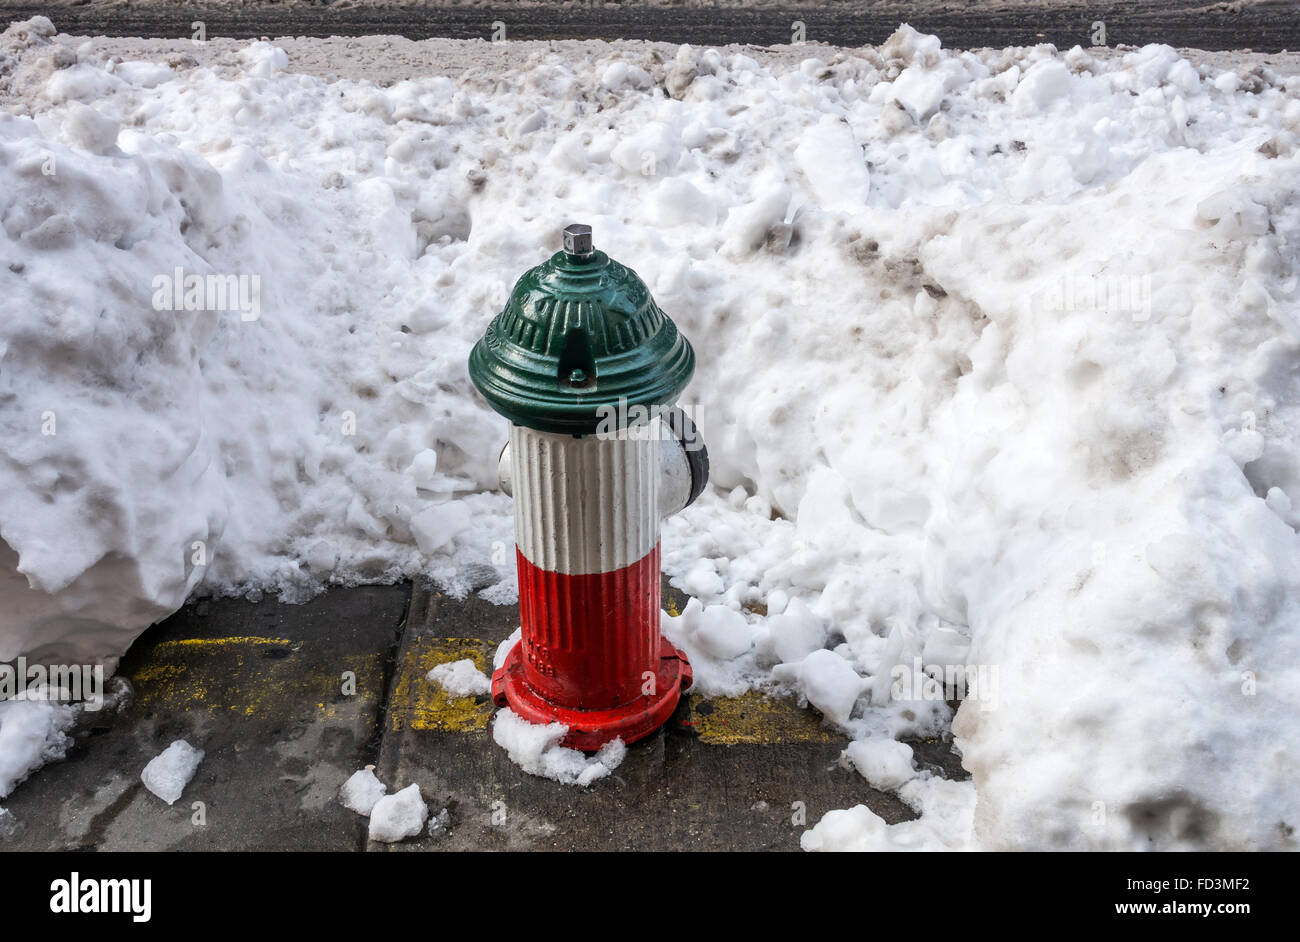 Red, white, and green fire hydrant after Jonas winter snow storm in Little Italy in New York City Stock Photo